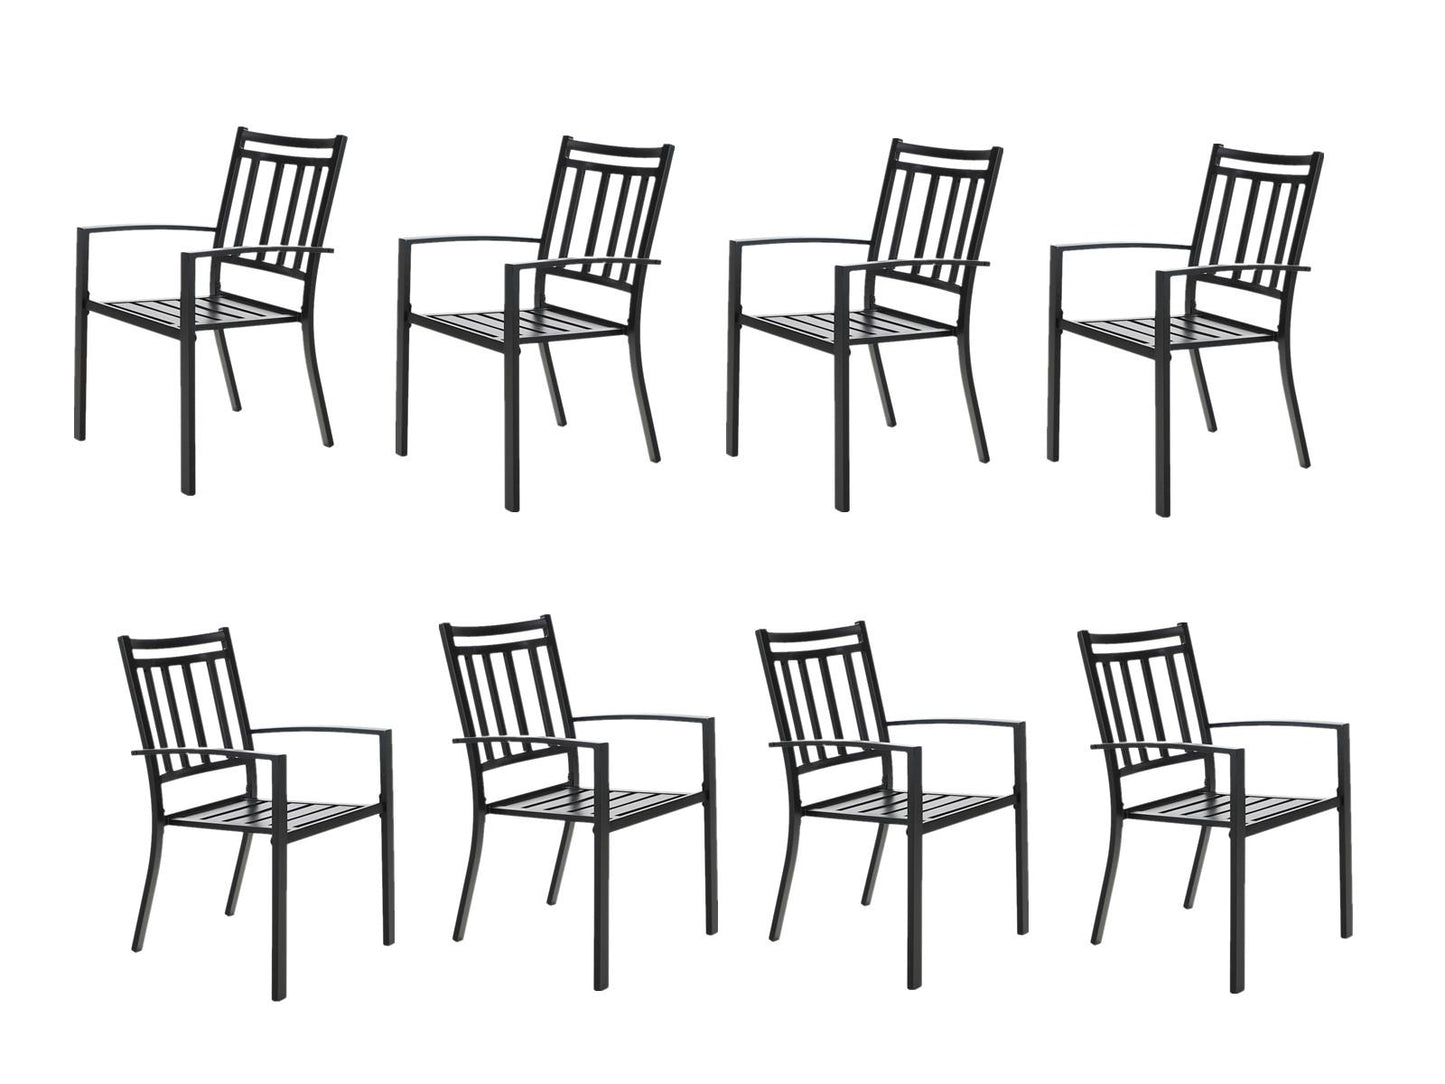 Sophia & William Outdoor Patio Metal Dining Chairs Iron Stackabe Chair with Armrest Set of 8, Black